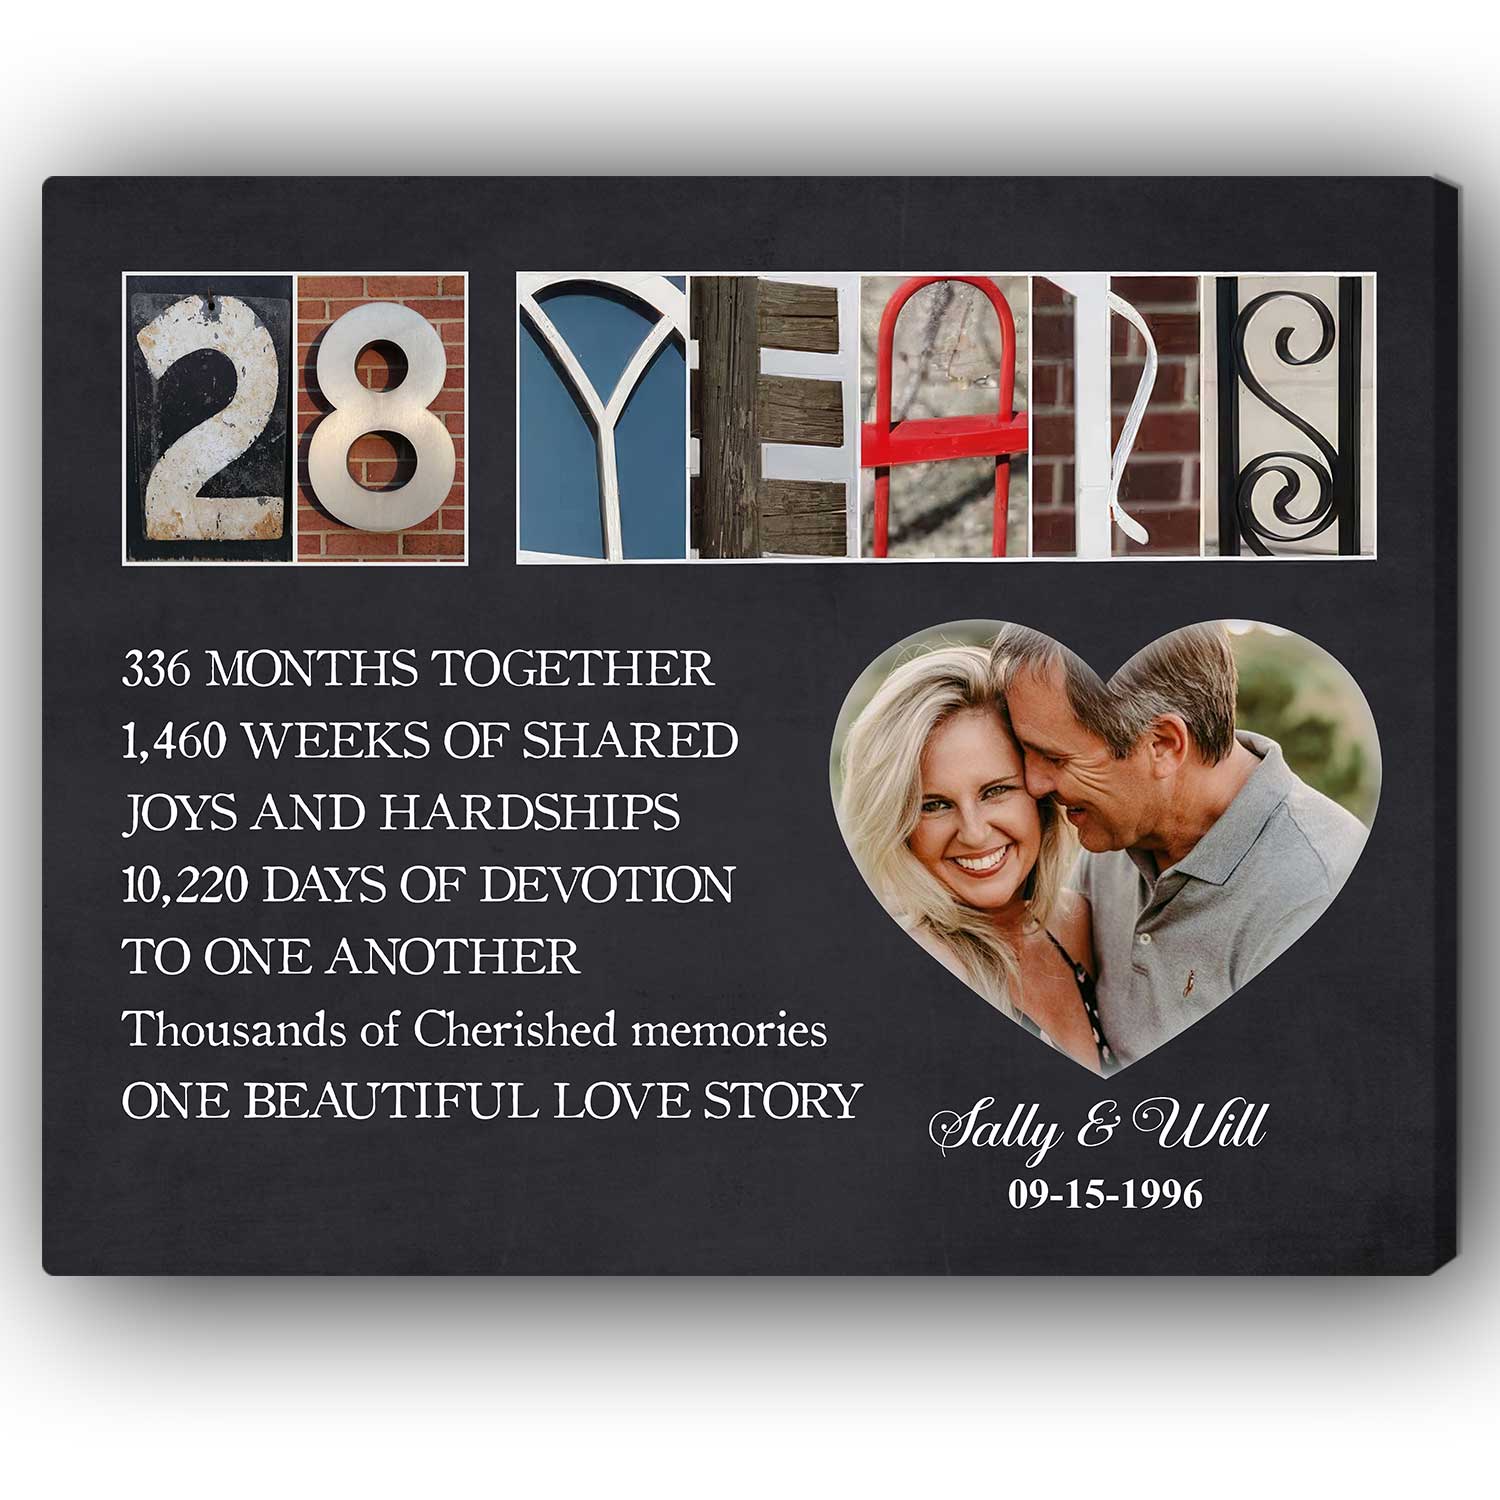 28 Years - Personalized 28 Year Anniversary gift For Parents, Husband or Wife - Custom Canvas Print - MyMindfulGifts